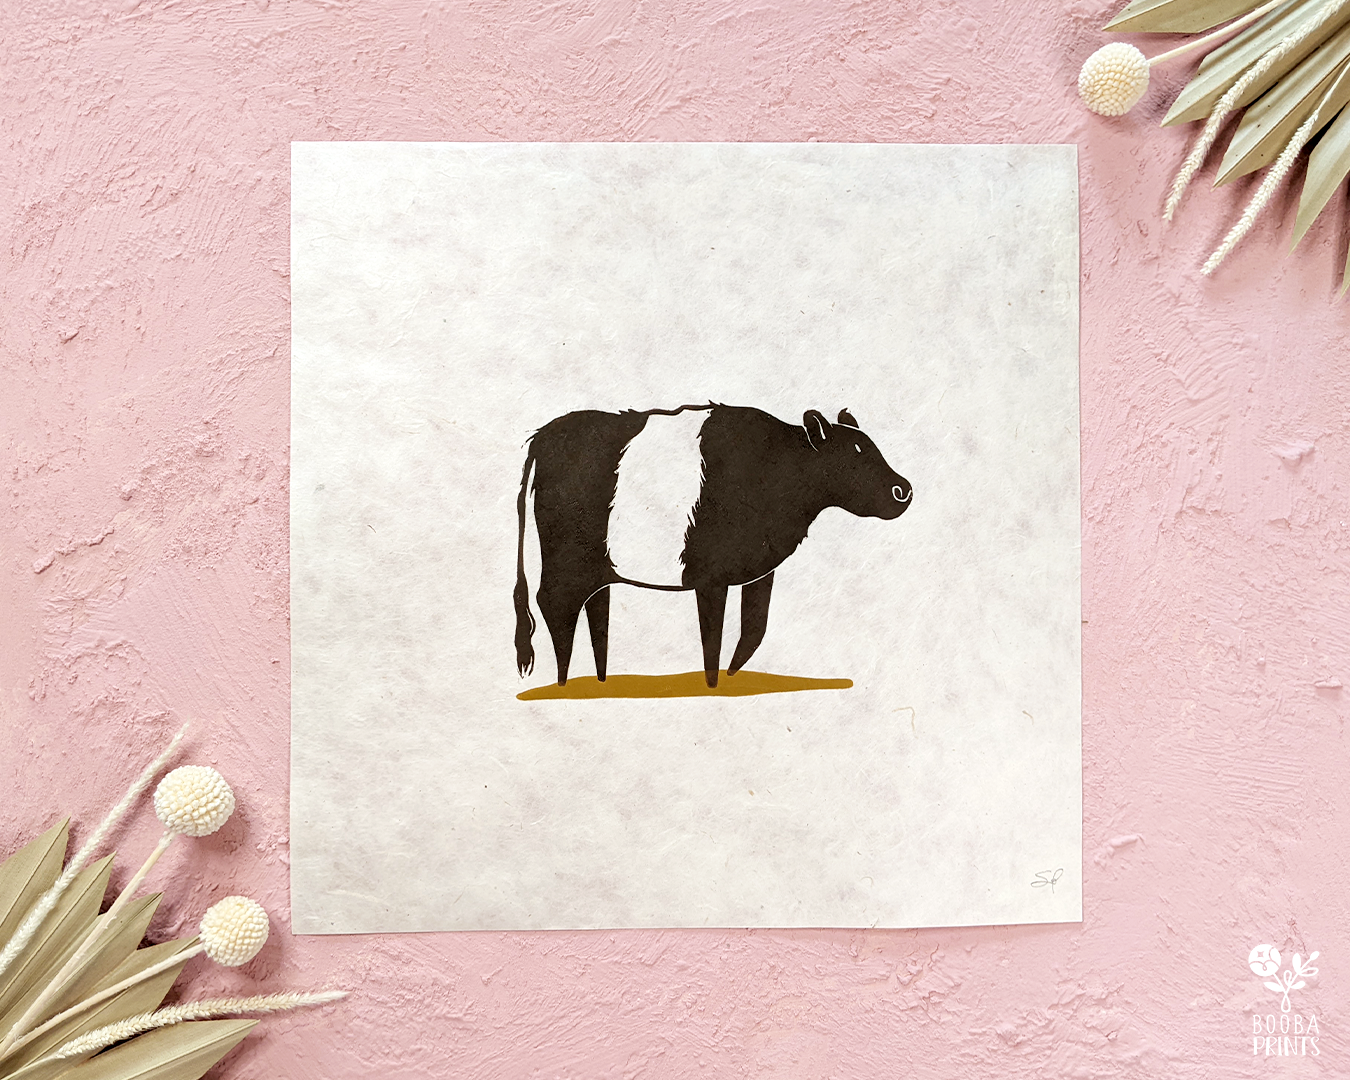 Fluffy Belted Galloway Cow For Home Decor ???? • Art By Booba Prints